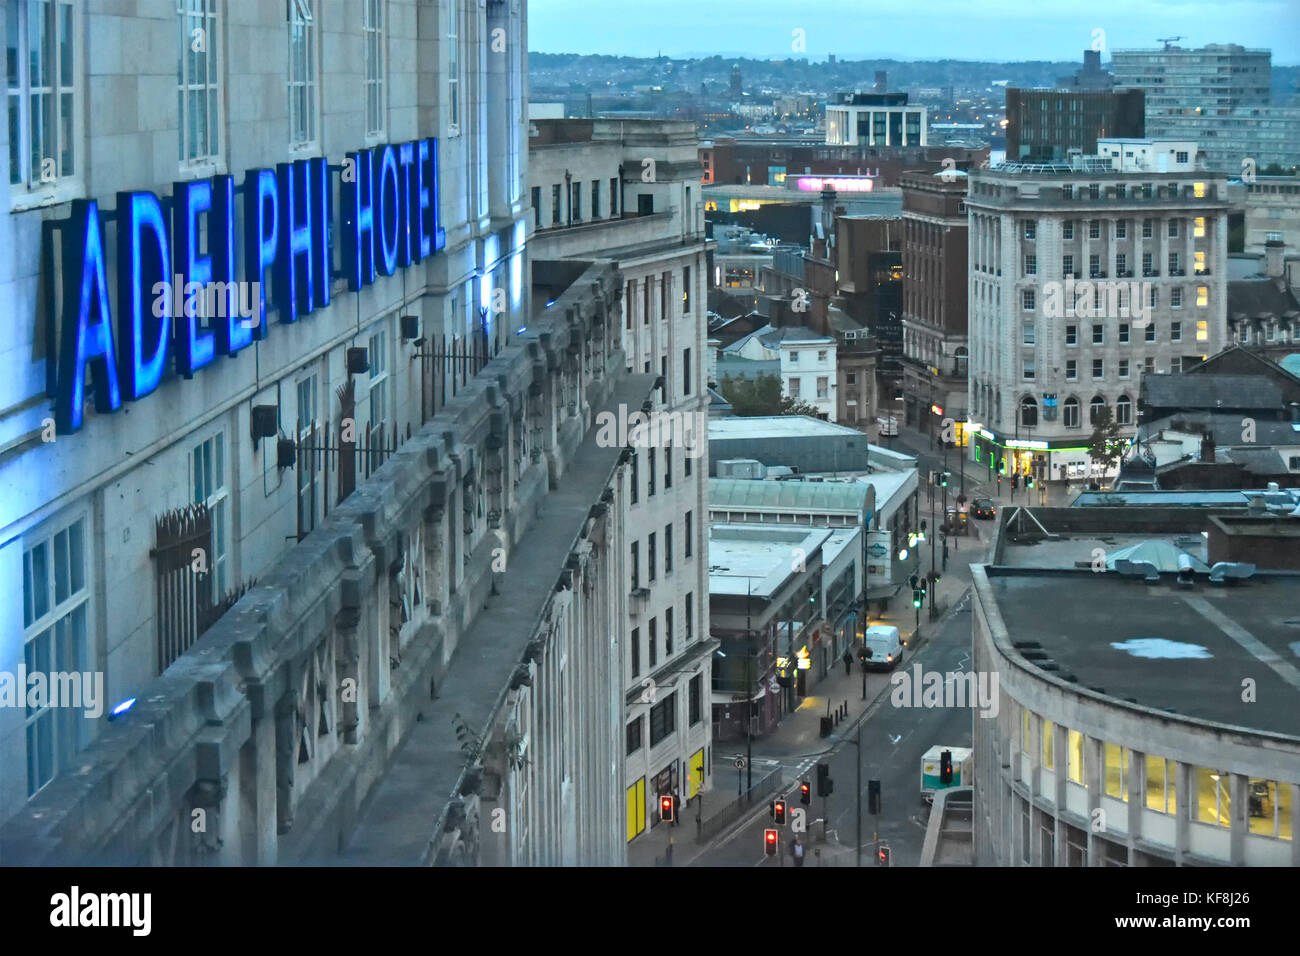 Early morning dawn aerial view above urban Liverpool city centre streets blue neon sign for Britannia Adelphi Hotel business Merseyside England UK Stock Photo